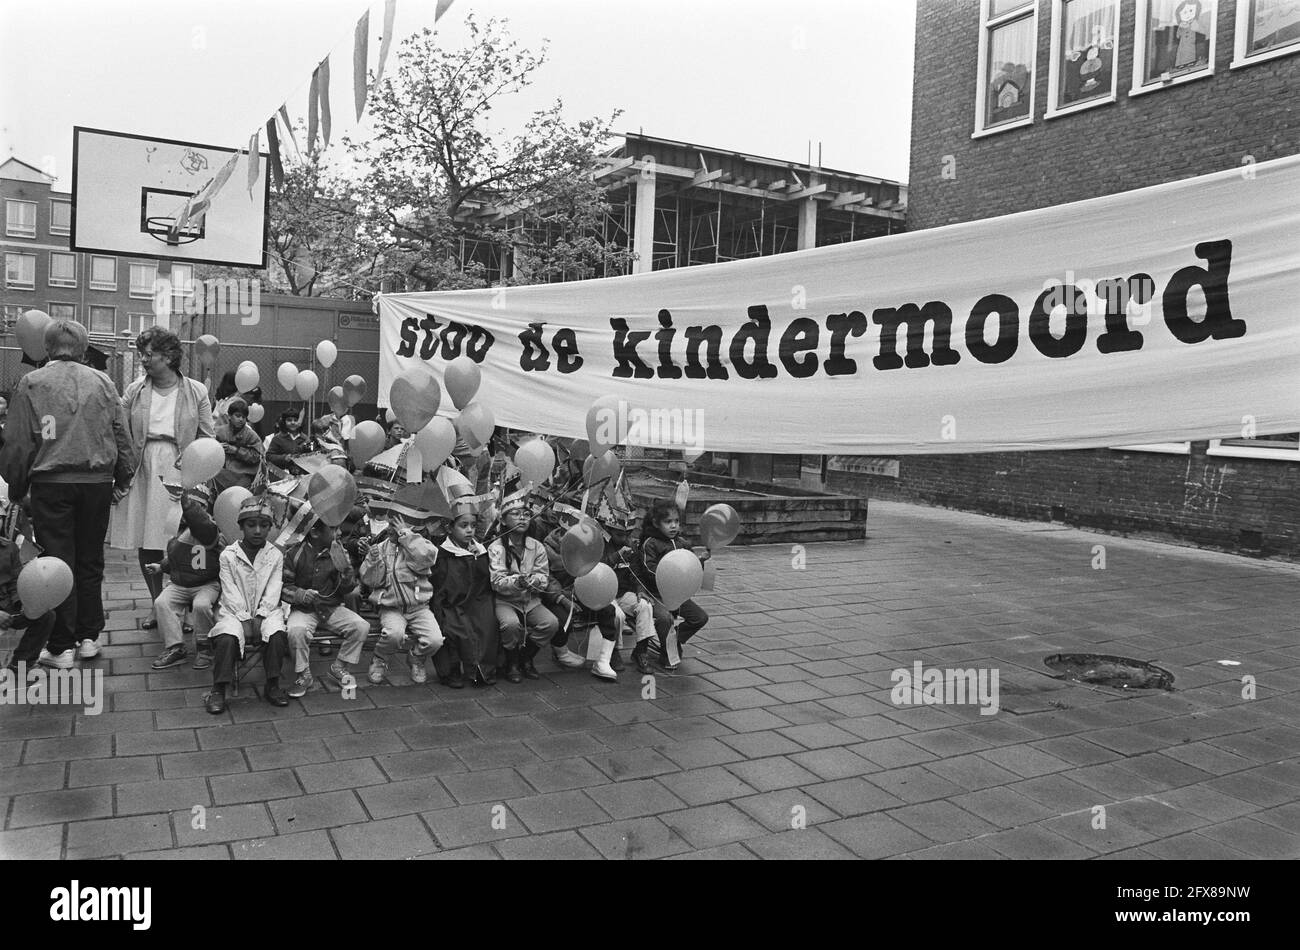 Batjan school in Amsterdam receives climbing frame sailing ship; banner Stop the child murder, 22 May 1985, The Netherlands, 20th century press agency photo, news to remember, documentary, historic photography 1945-1990, visual stories, human history of the Twentieth Century, capturing moments in time Stock Photo